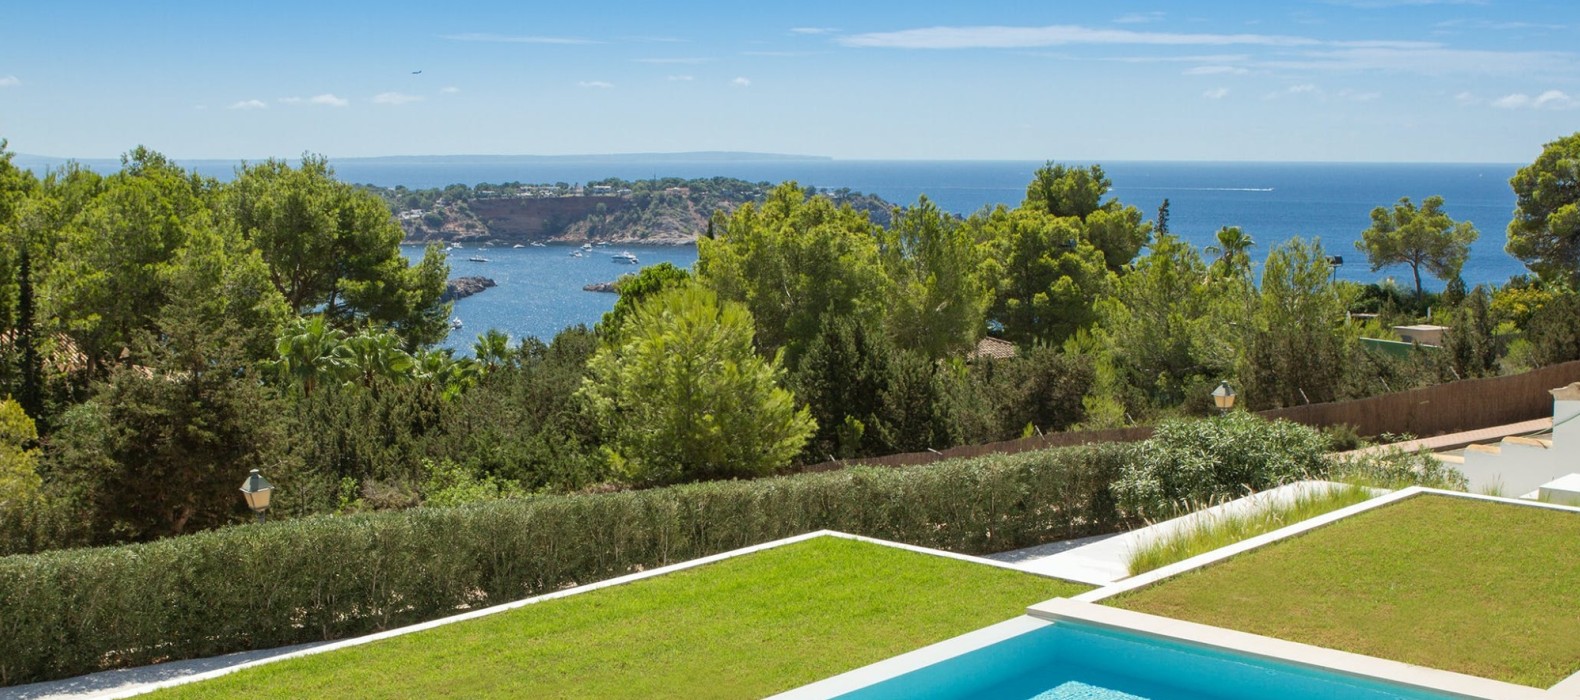 Exterior area with pool and sea view of Villa Kahil Ibiza